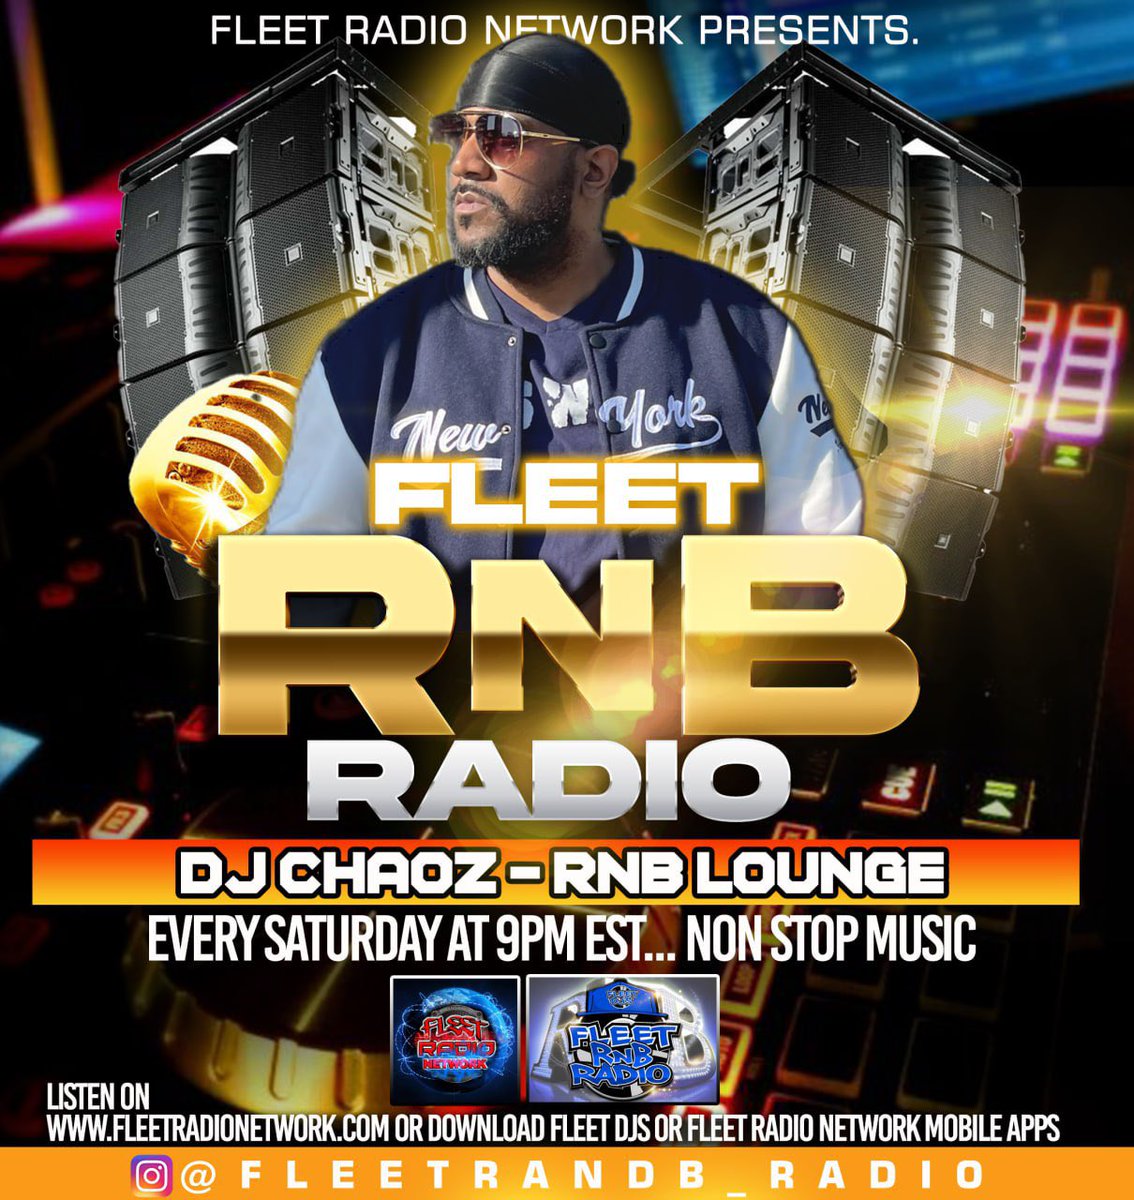 Tap in every Saturday at 9pm Est FleetRnBRadio down load the app or listen on the web. The Rnb lounge with yours truly… @fleetrandb_radio @massfleetdjs @fleetdjs #Massfleetdjs #FleetDJs #fleetnations #fleetRnb